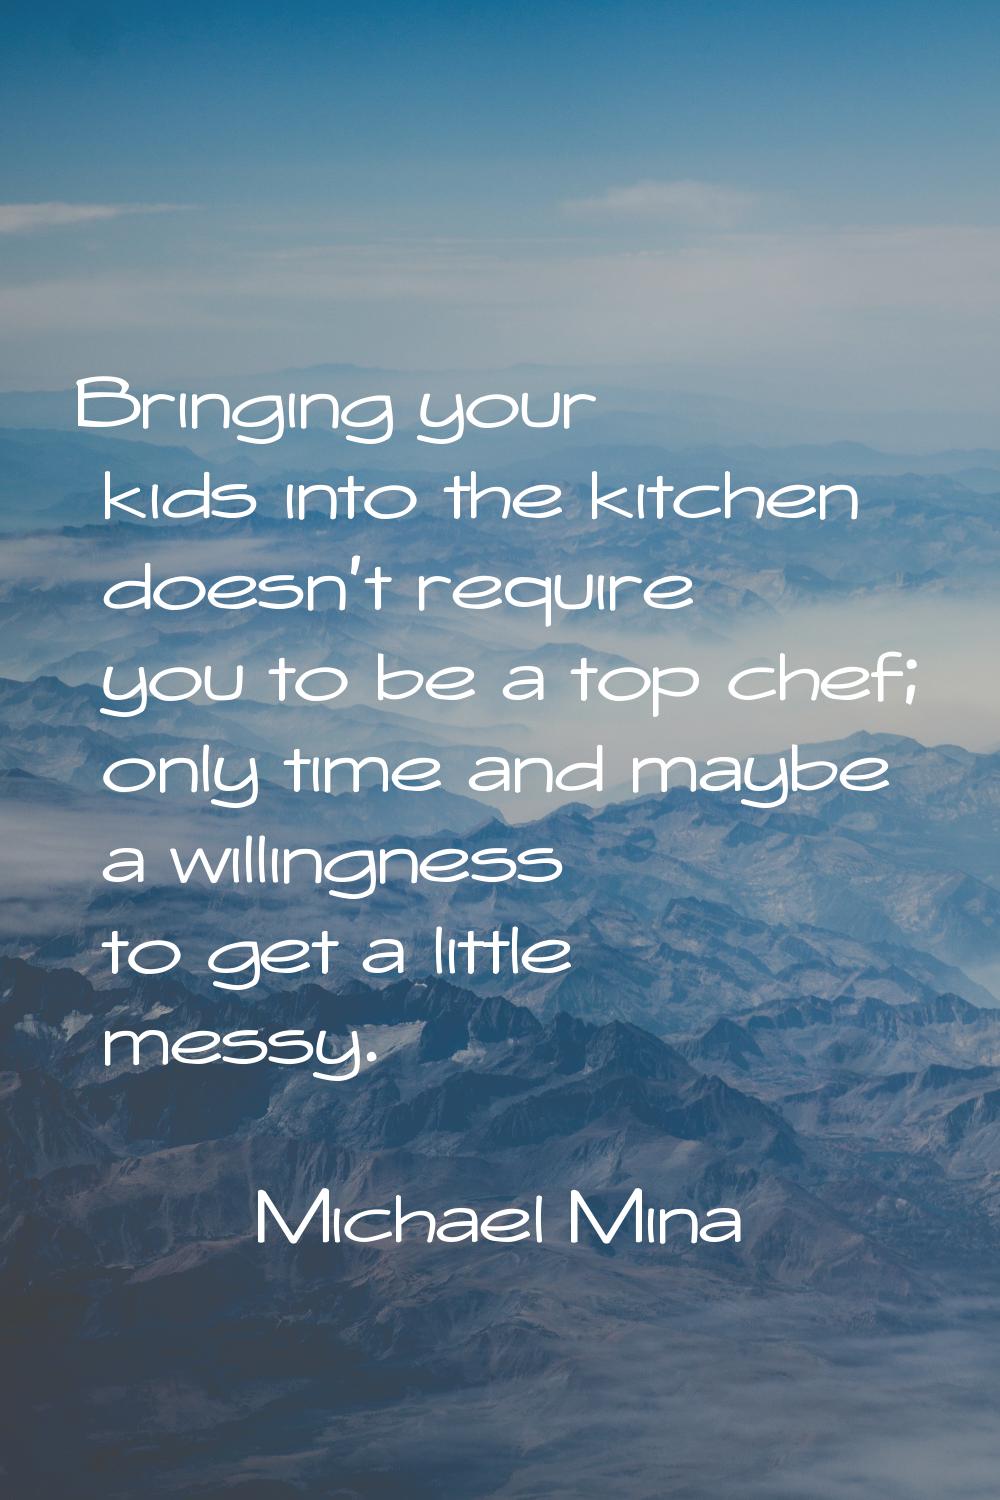 Bringing your kids into the kitchen doesn't require you to be a top chef; only time and maybe a wil